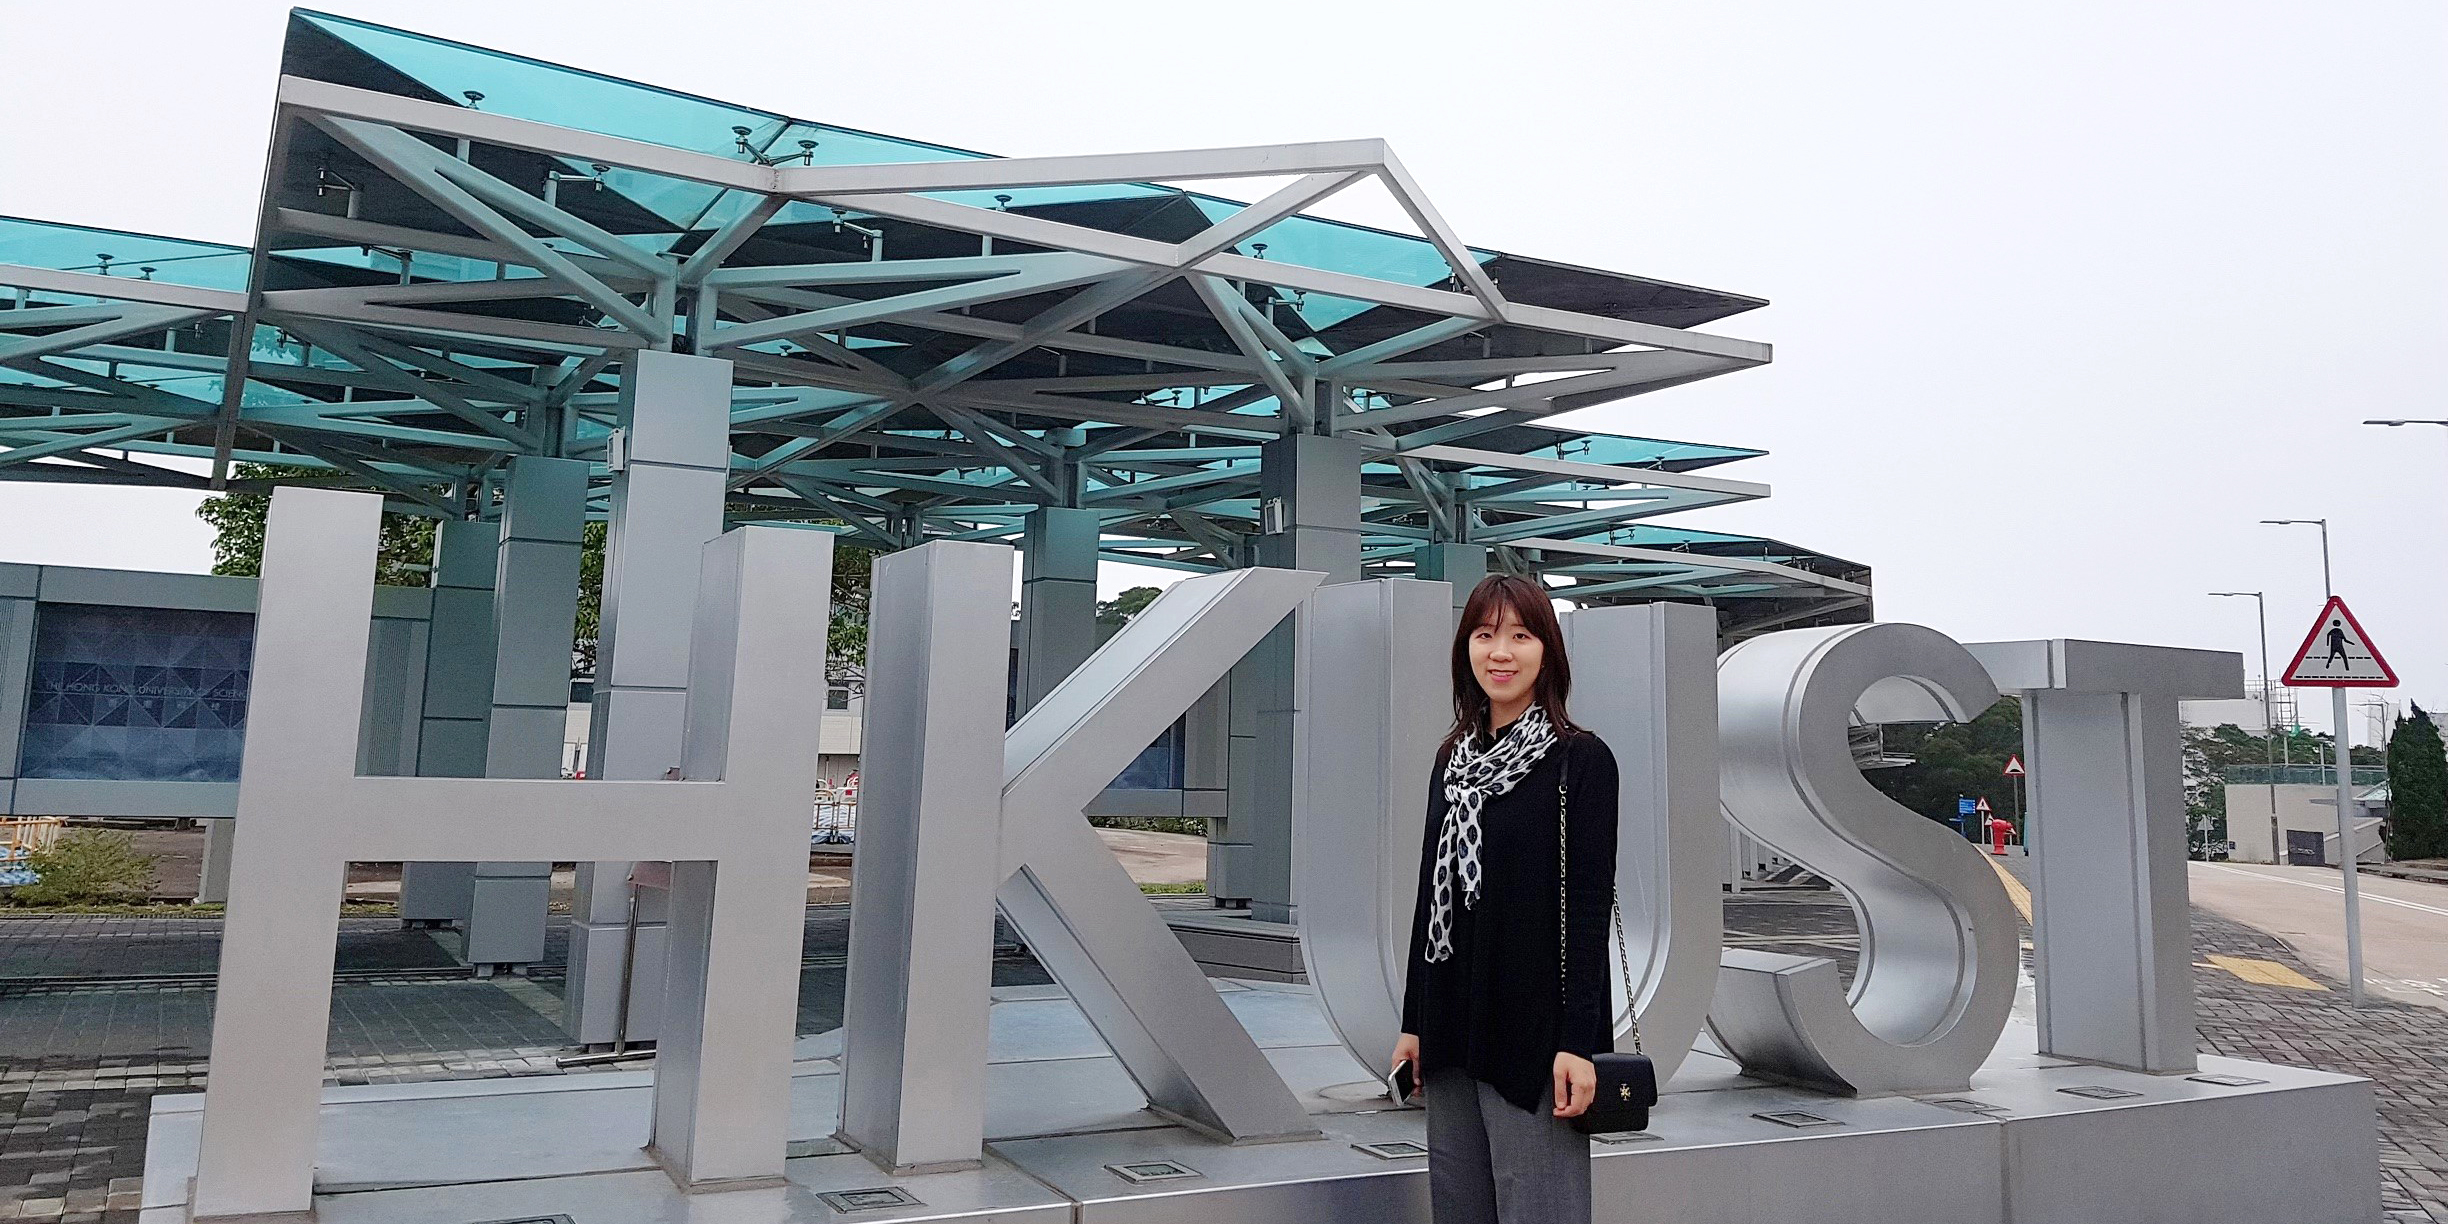 Dr. Gloria Hyunjung KWAK is currently Postdoctoral Fellow of the Harvard Medical School and Massachusetts General Hospital in the United States, upon PhD graduation at HKUST.